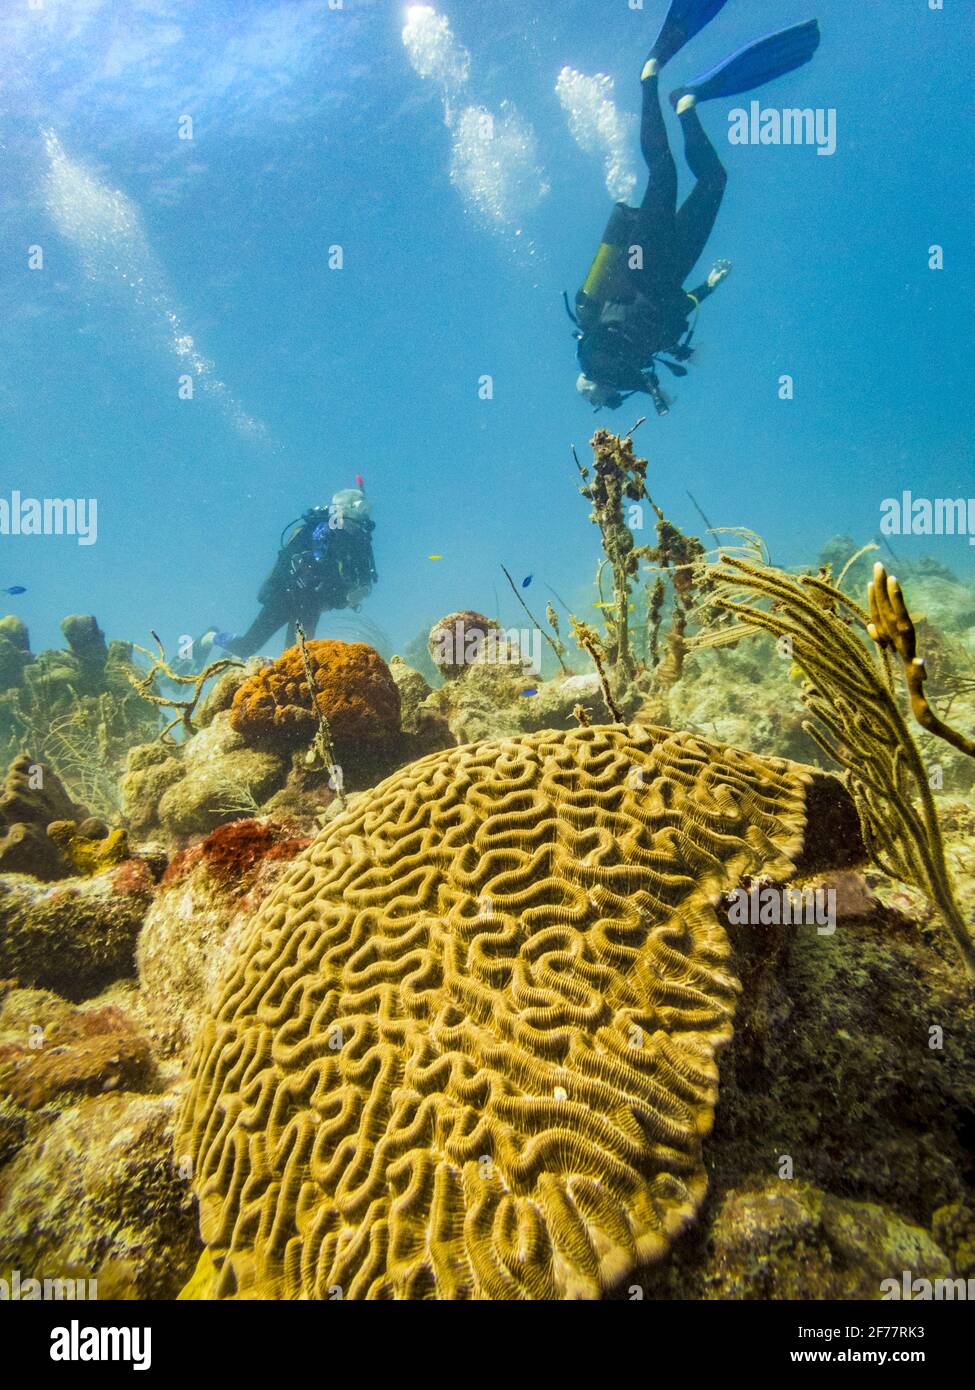 France, Caribbean, French West Indies, Guadeloupe, Grand Cul-de-Sac marin, heart of the national park of Guadeloupe, scuba diving on the site of Pierre aux Anges, in the lagoon around the islet Fajou, brain coral, underwater view Stock Photo